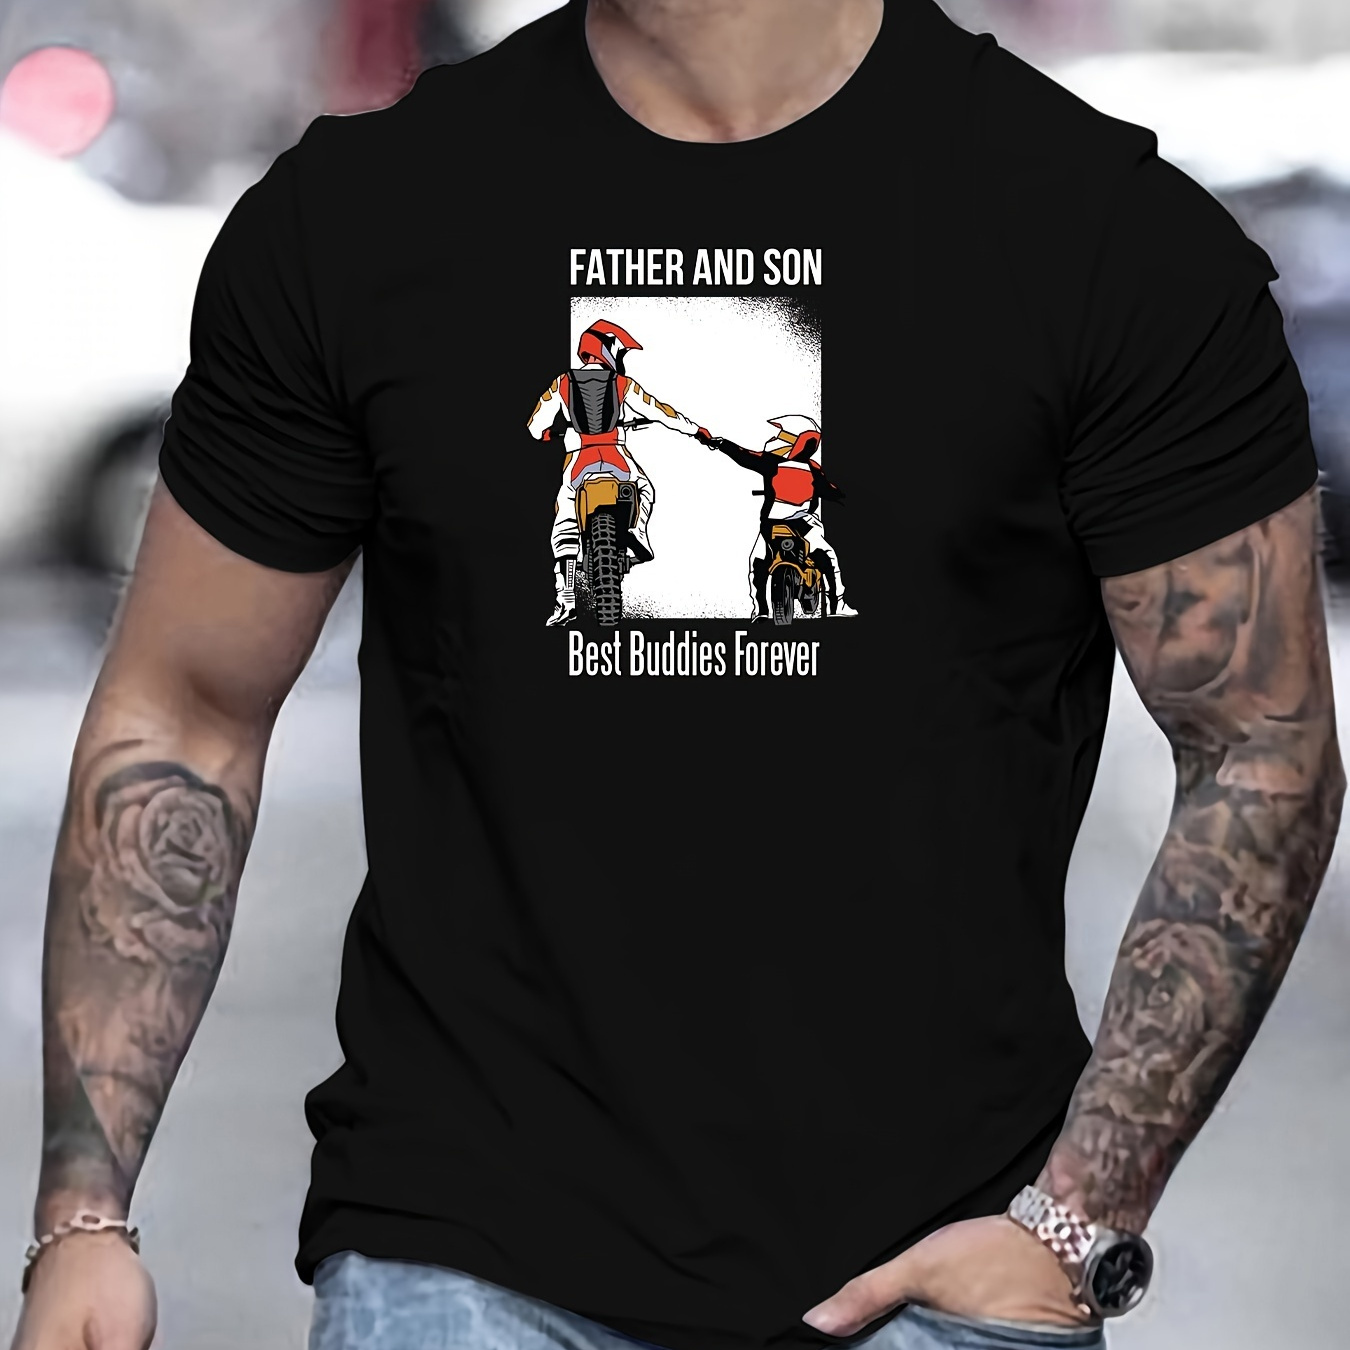 

Father And Son Print T Shirt, Tees For Men, Casual Short Sleeve T-shirt For Summer